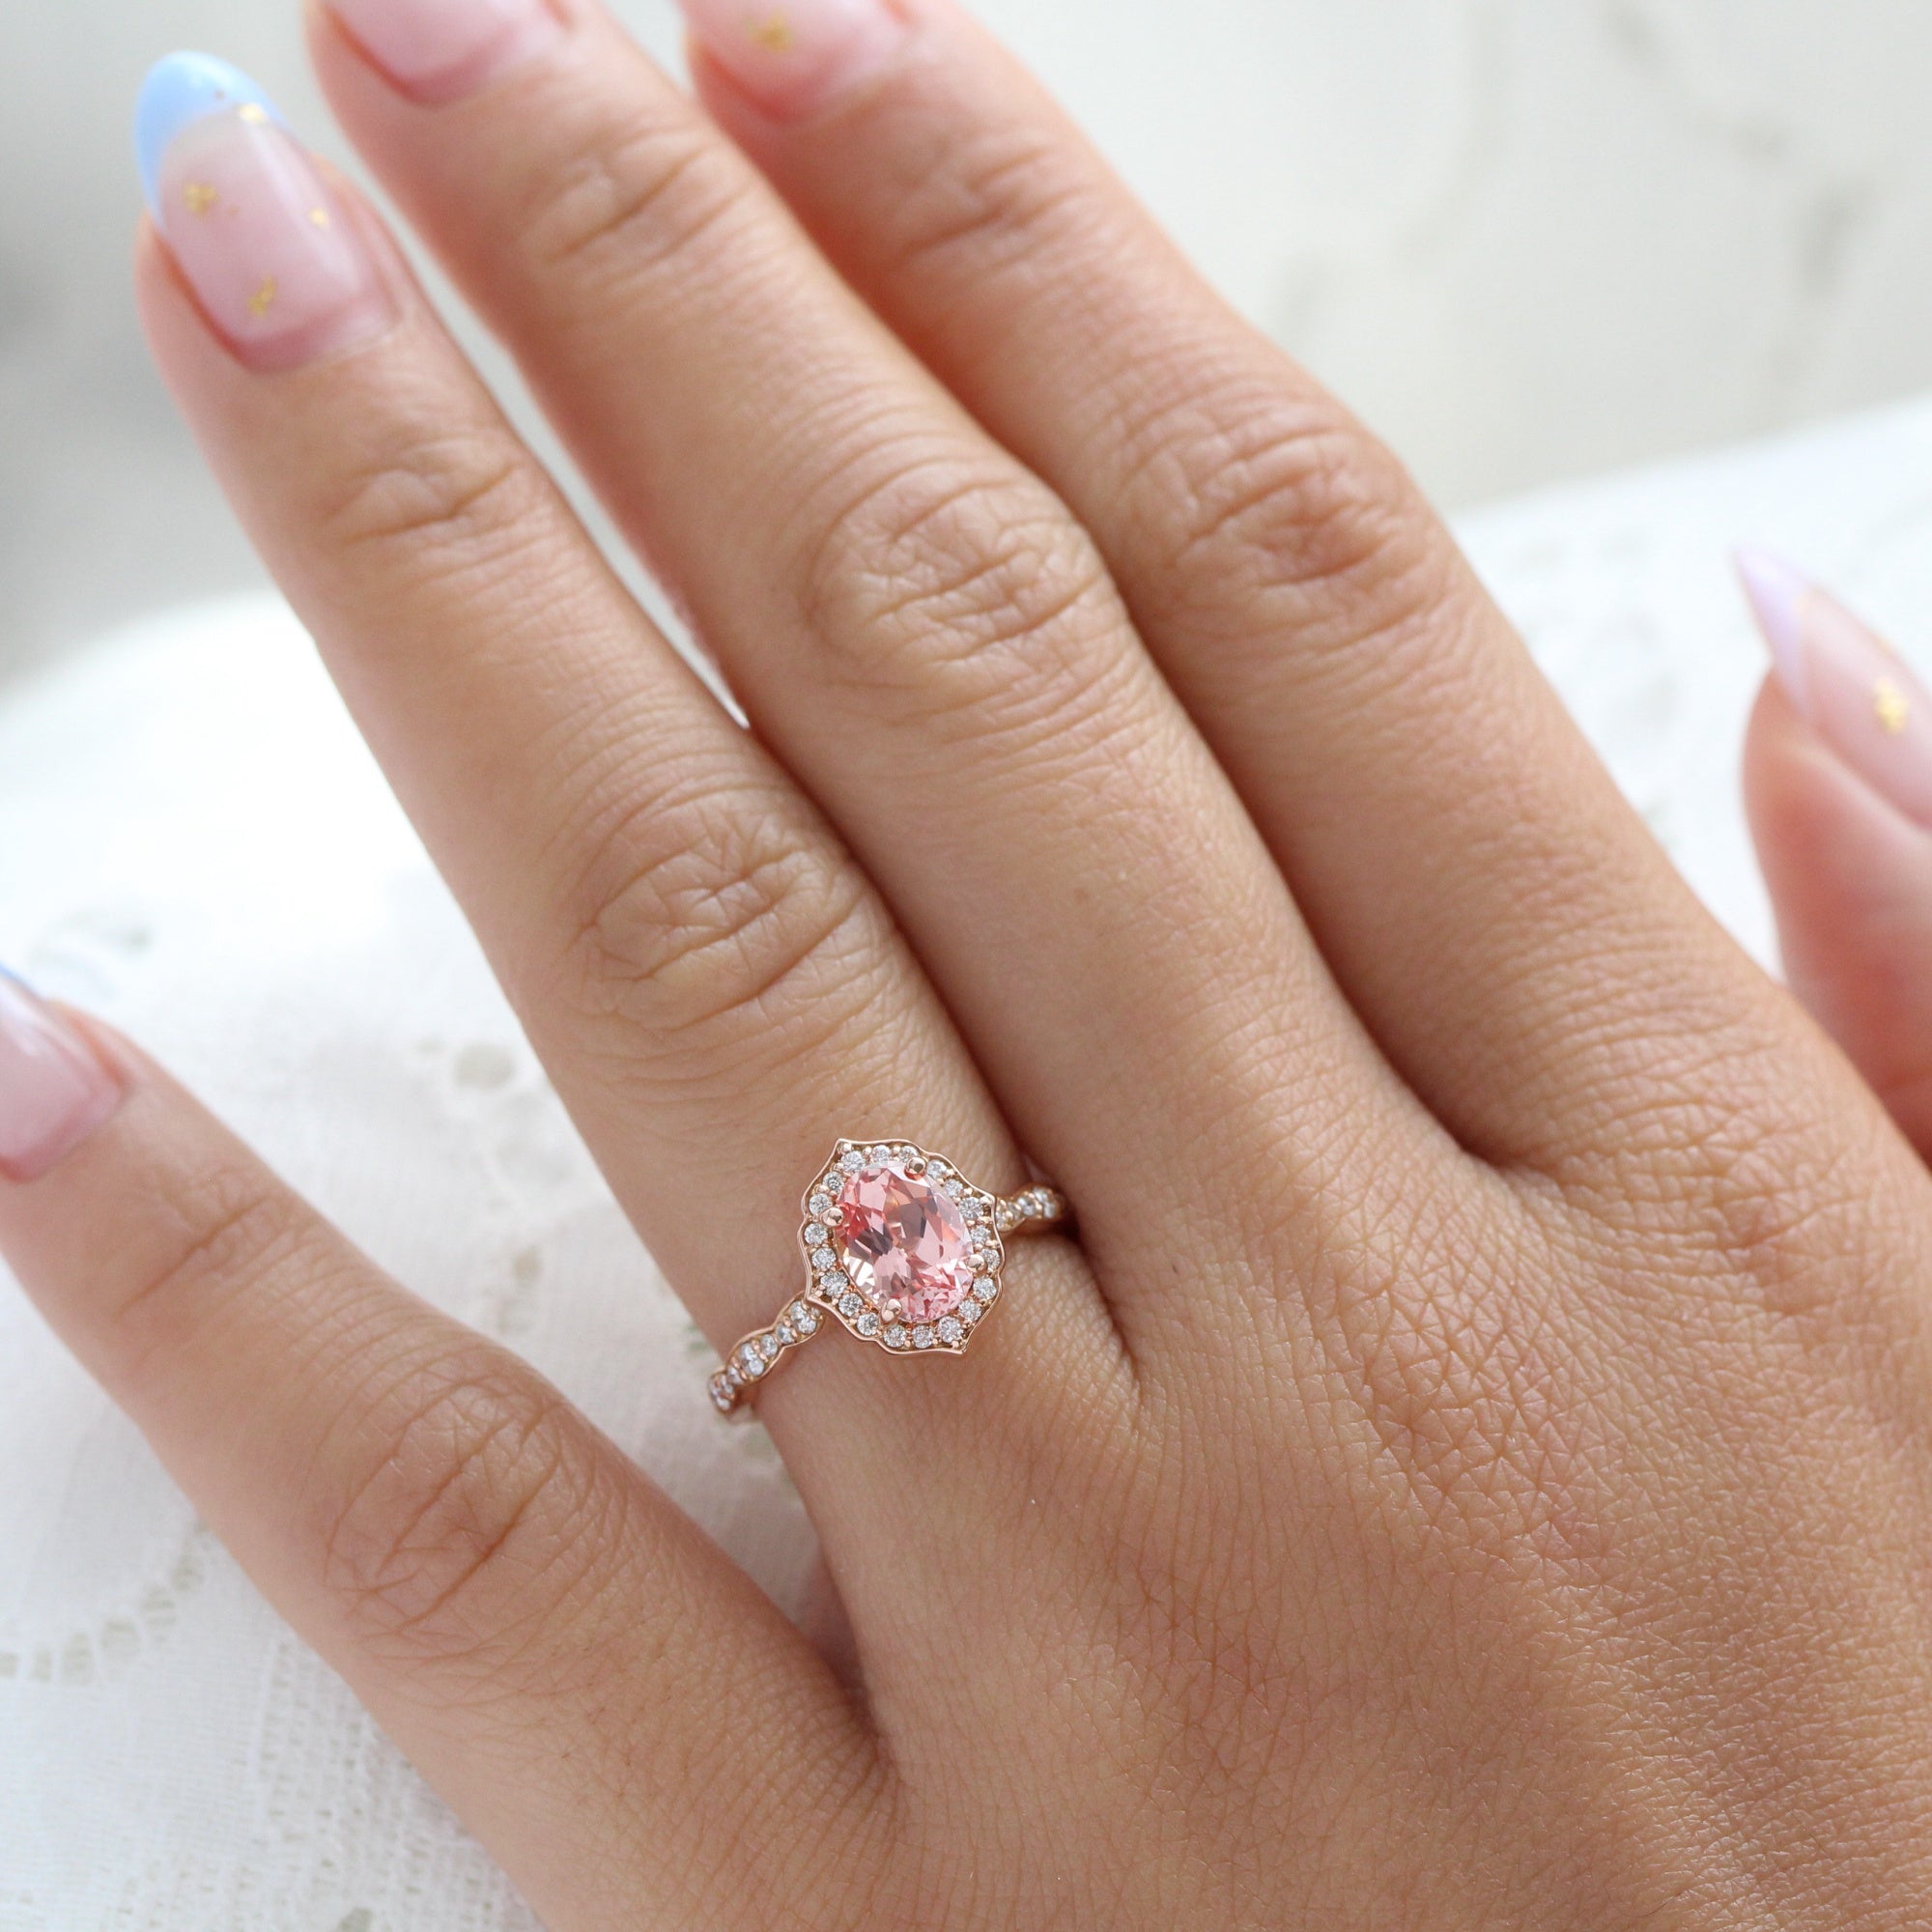 Oval peach sapphire engagement ring rose gold vintage halo diamond sapphire ring la more design jewelry